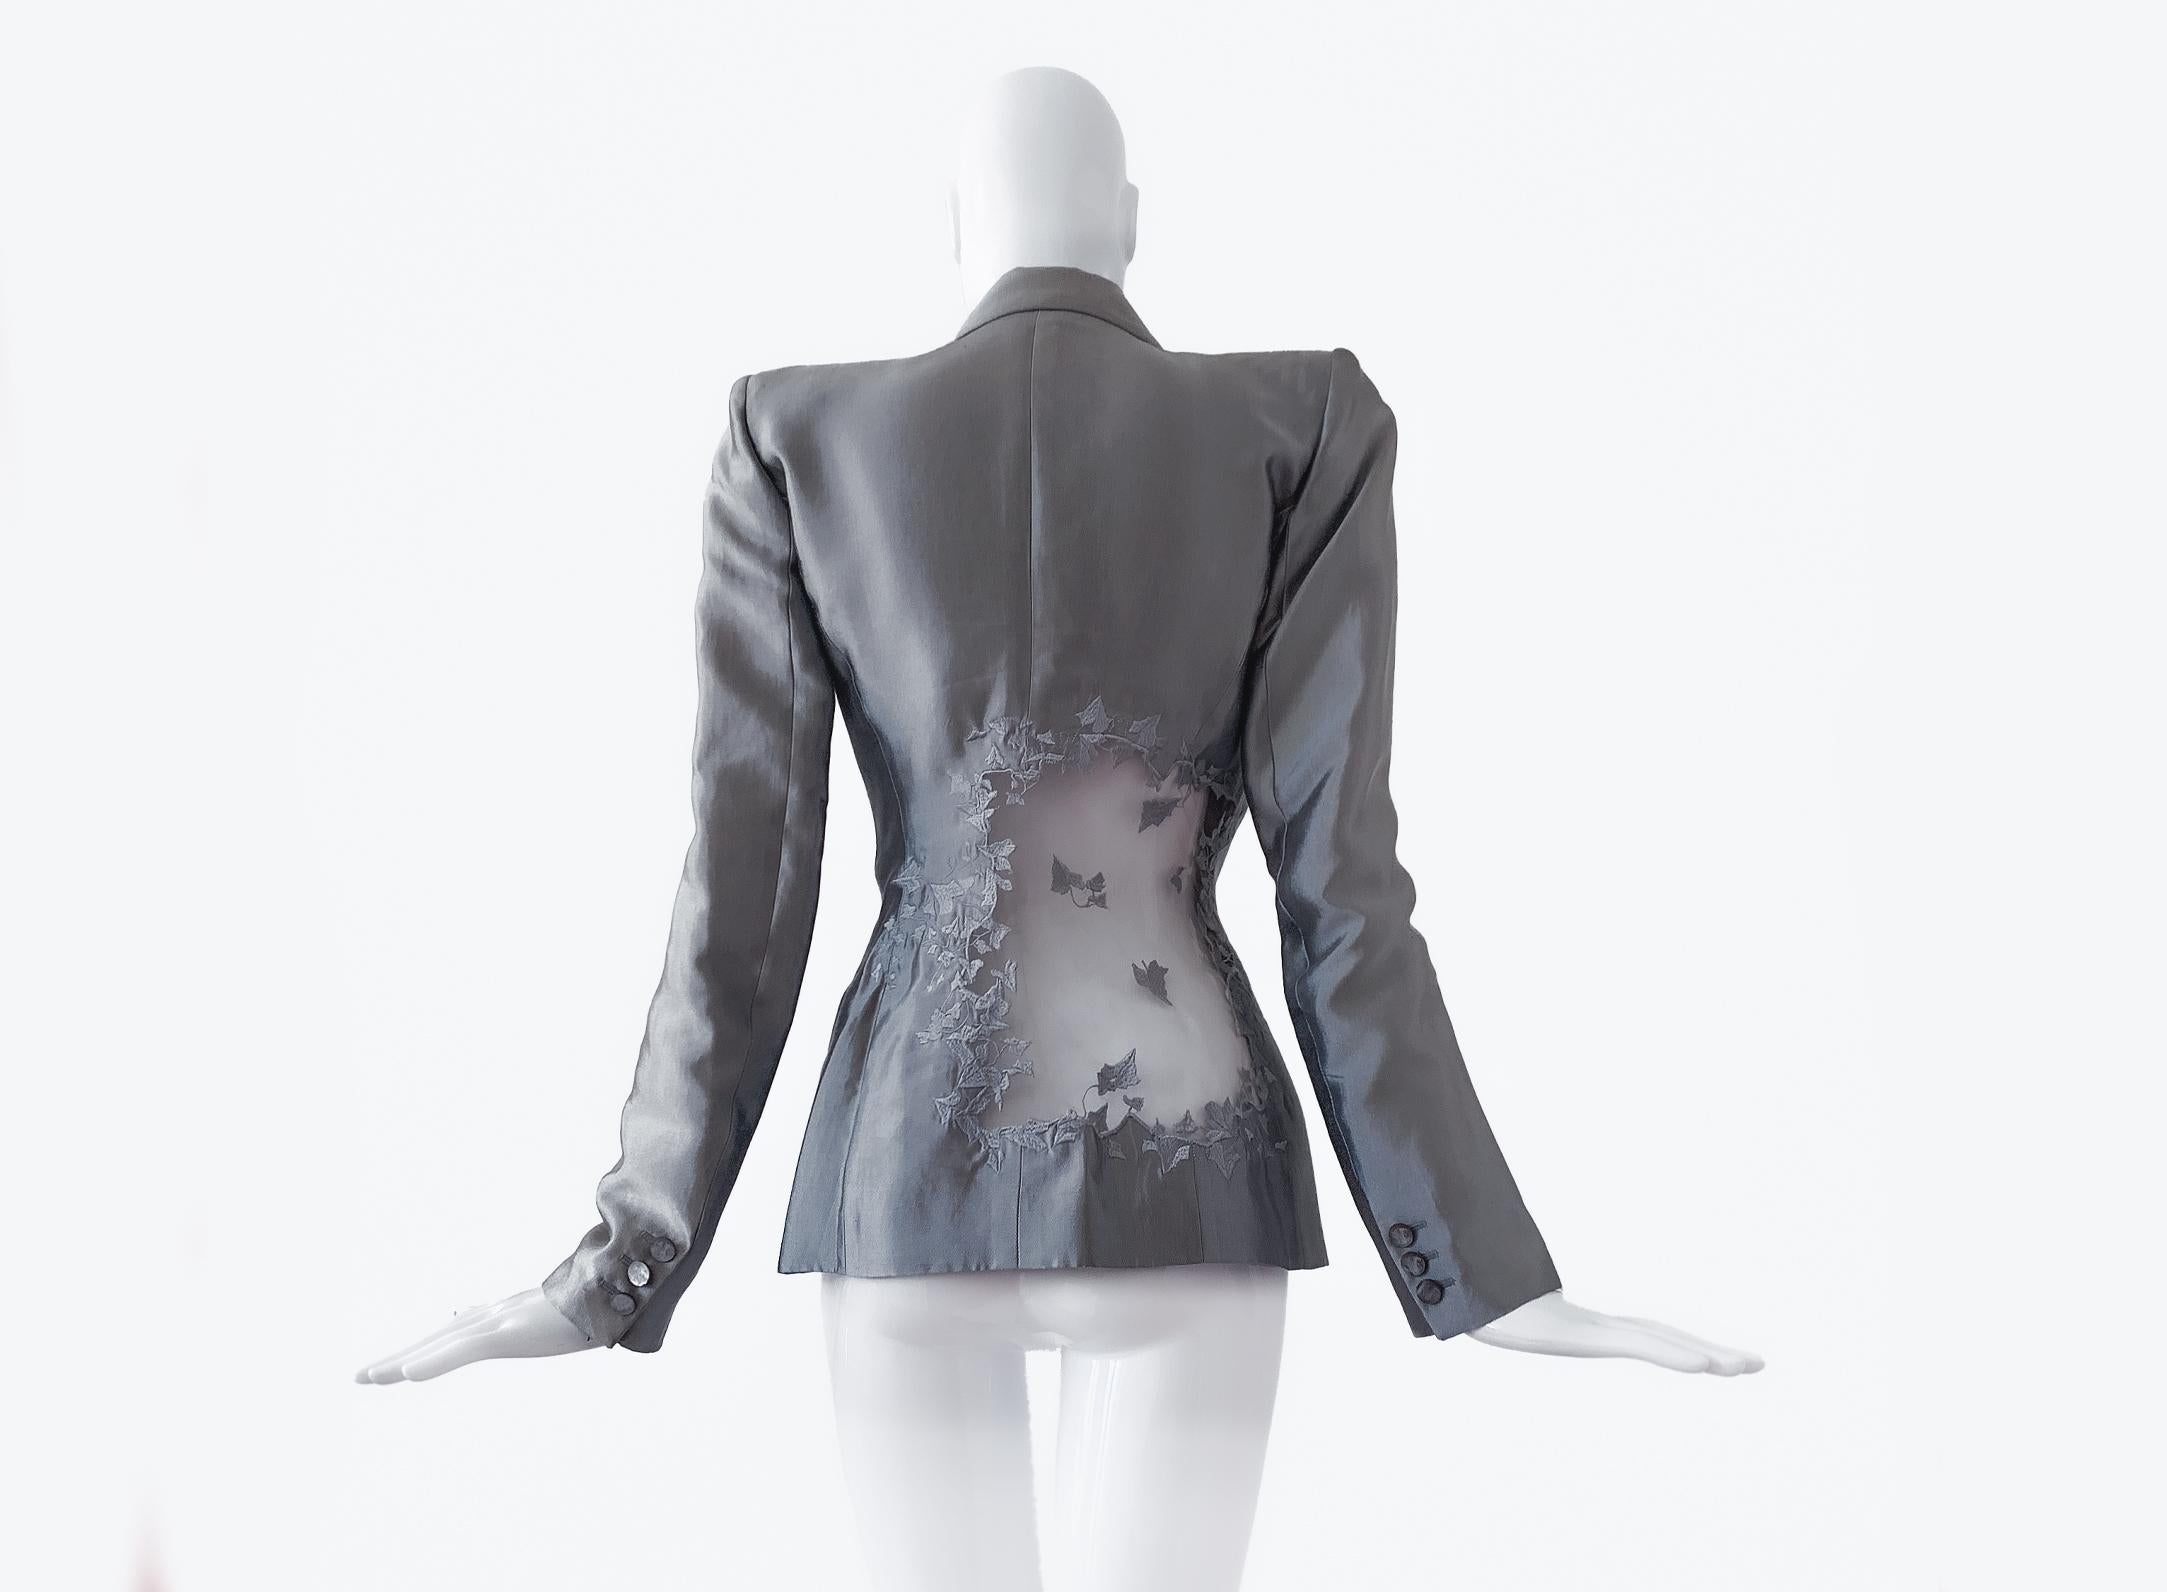 
Rare archival Collectors' Piece.
Showstopper
Gorgeous Alexander McQueen Ensemble. Legendary Spring Summer 1999 Collection runway look as skirtsuit in silver.
Silk ensemble from his documented 1999 collection. This highly stylized piece is a perfect